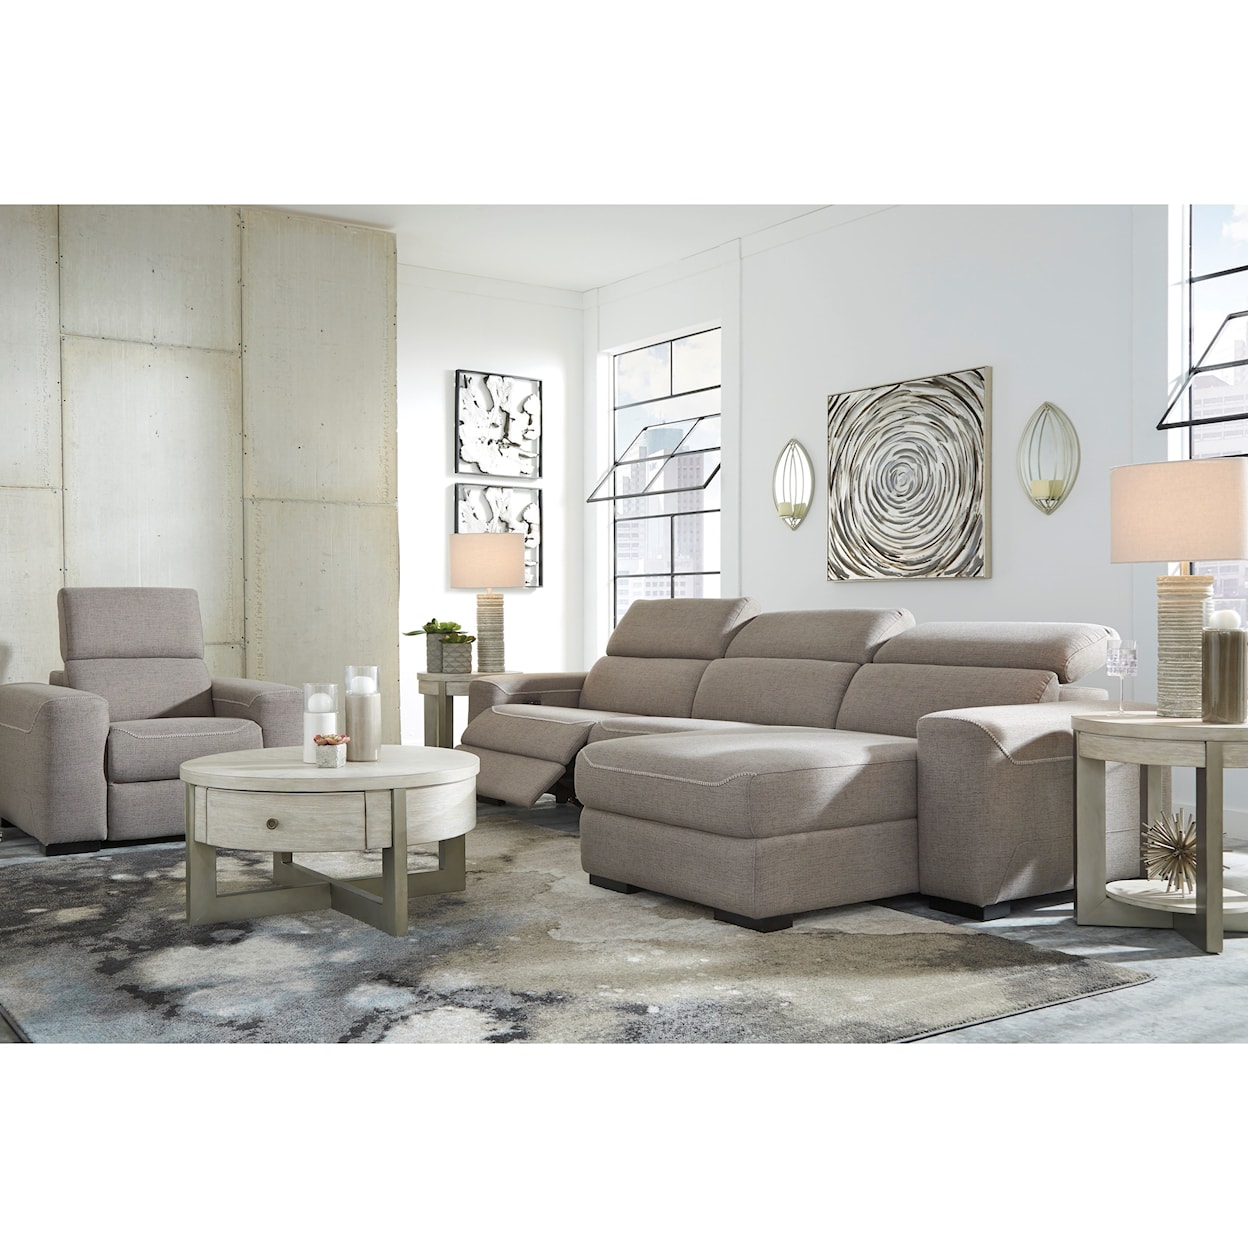 Signature Design by Ashley Mabton Power Reclining Living Room Group